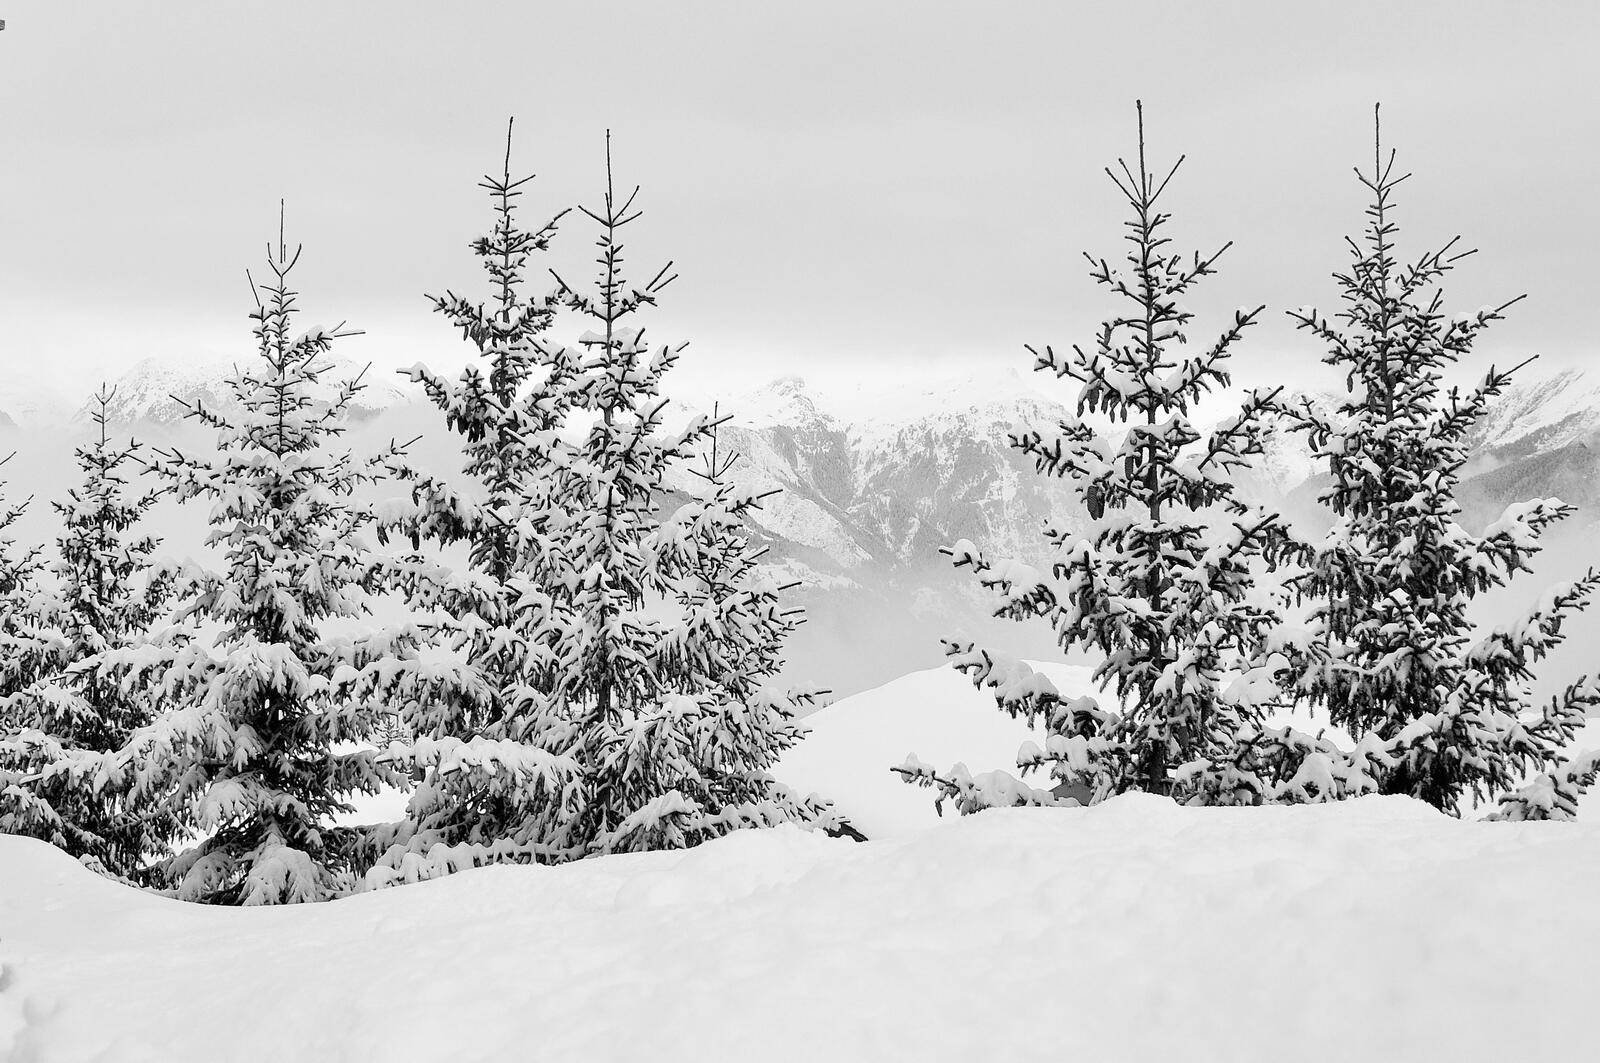 Free photo Wallpaper with snowy Christmas trees